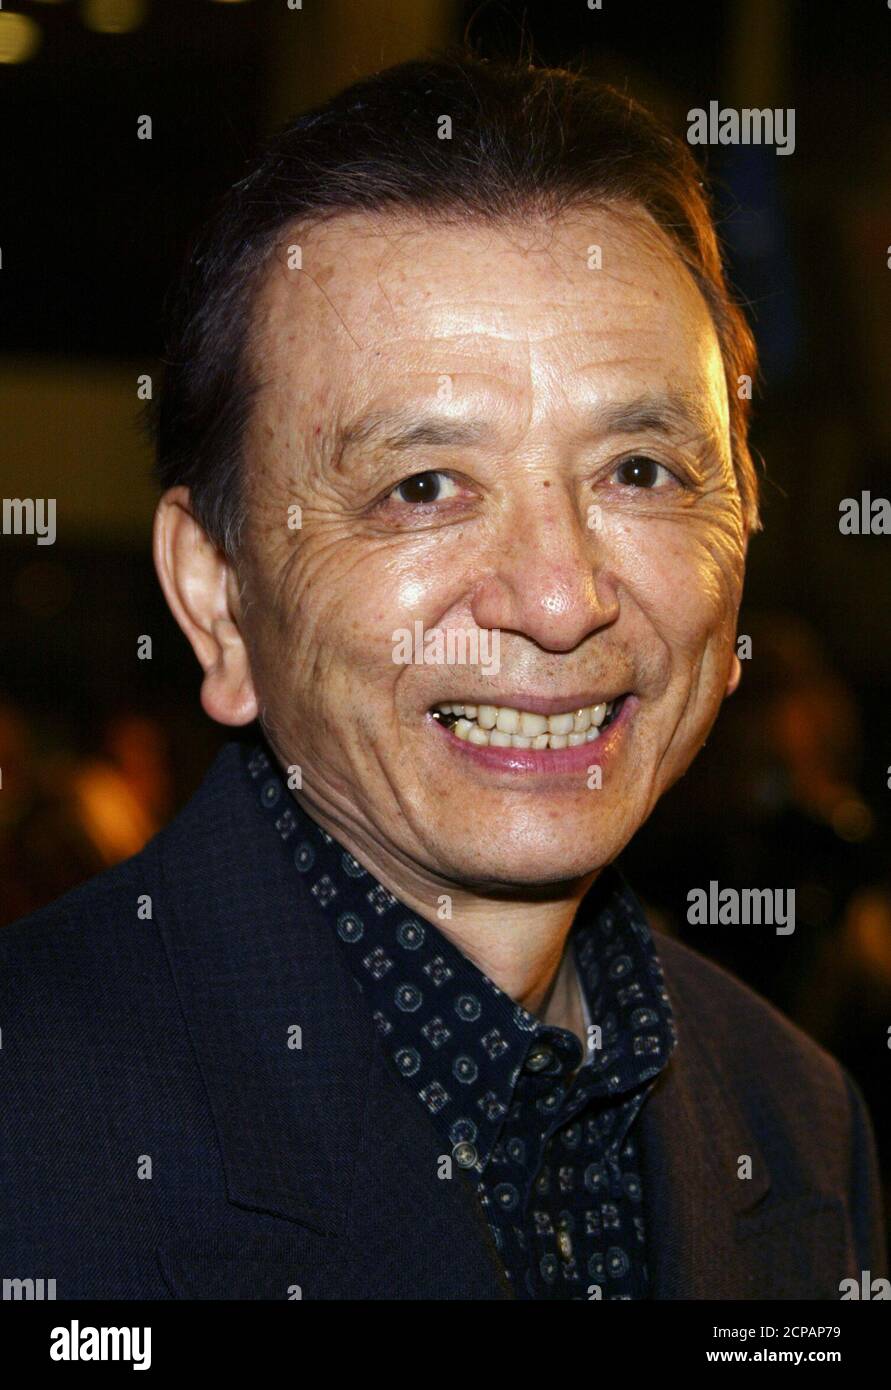 Asian-American actor James Hong arrives for the premiere of 'Kung Fu Hustle' at the Arclight Cinerama Dome theatre in Hollywood March 29, 2005. REUTERS/Lee Celano  ljc/TC Stock Photo